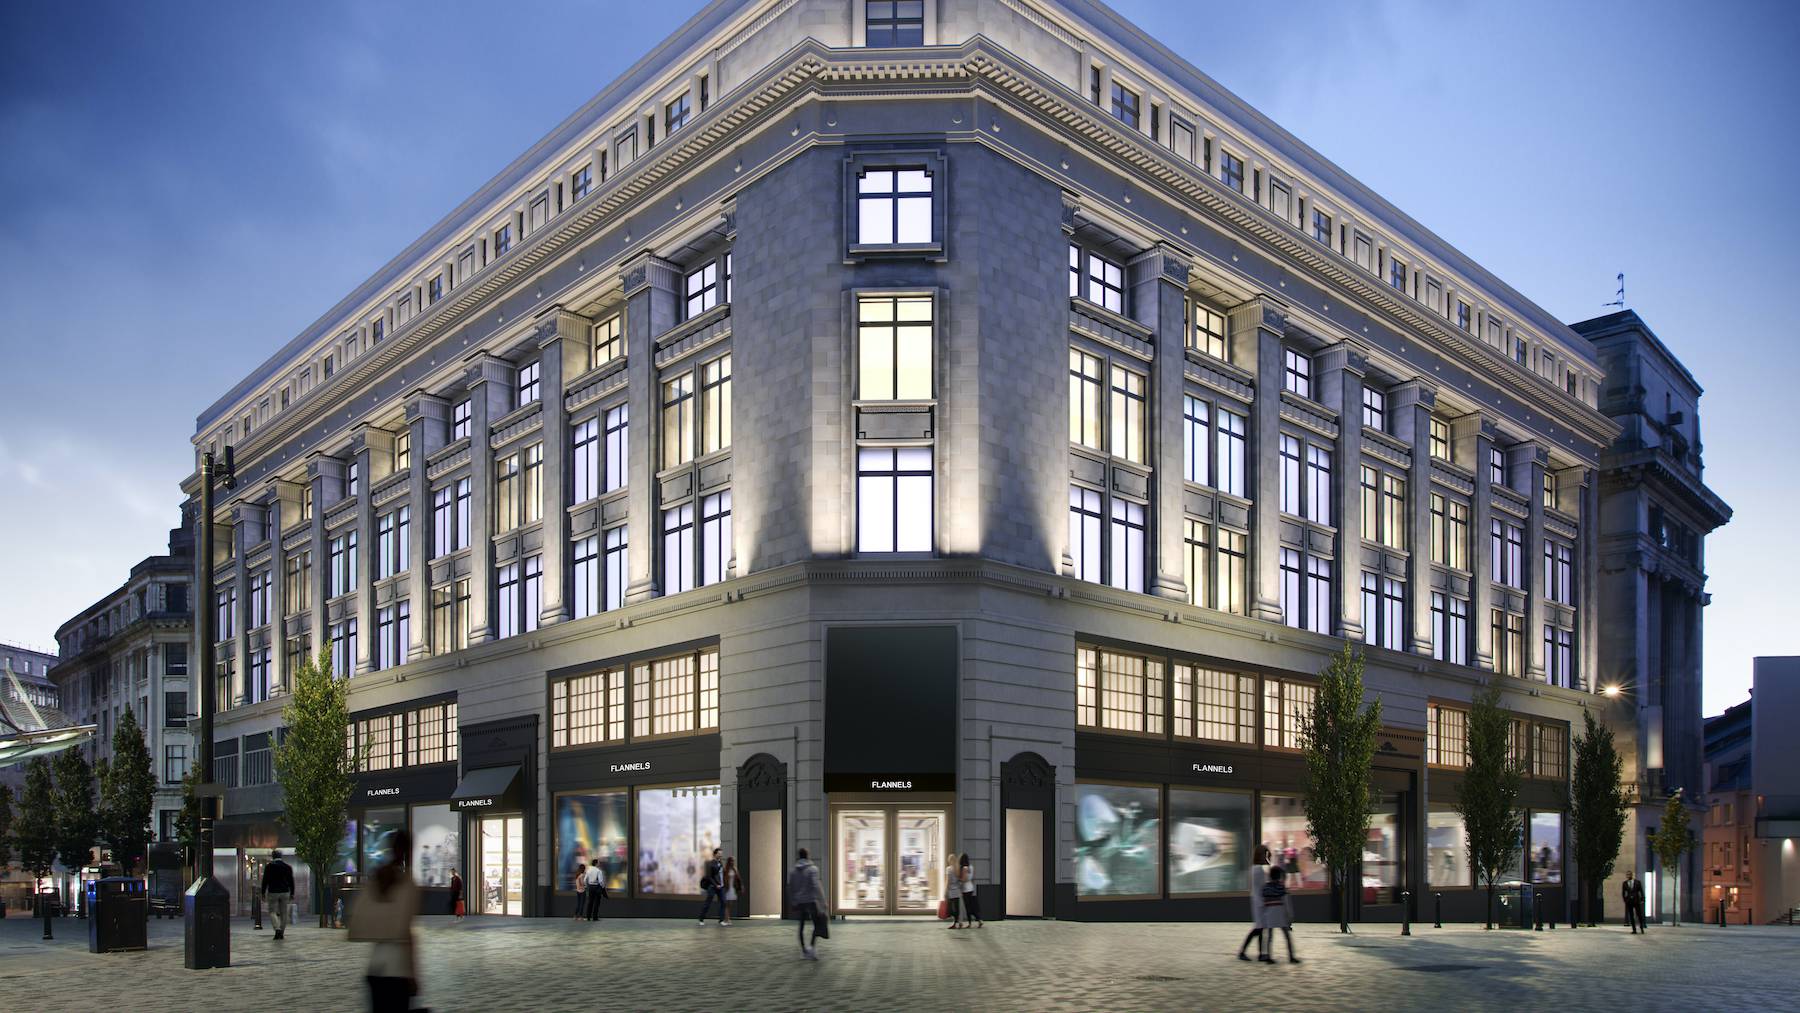 A rendering of Flannels new 120,000 square foot store in Liverpool | Source: Courtesy